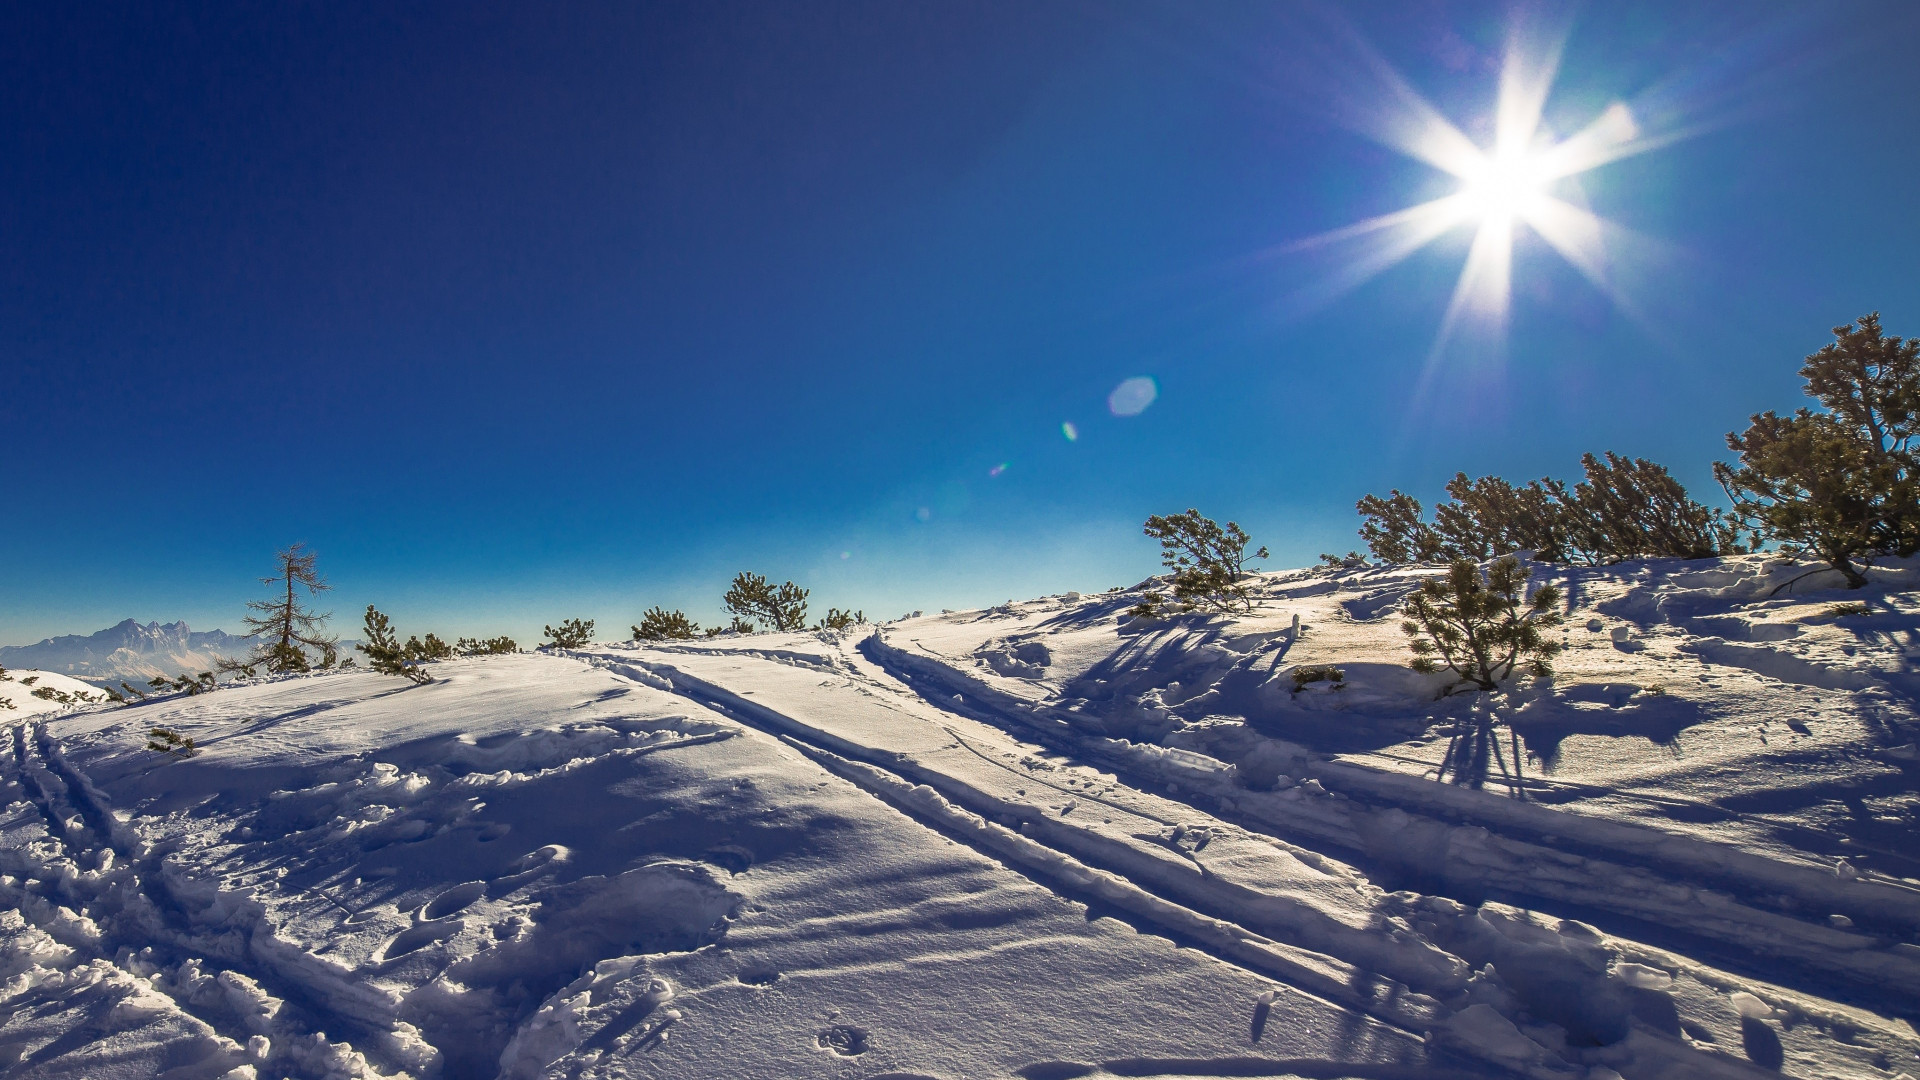 Download wallpaper Sunny day in this Winter landscape 1920x1080